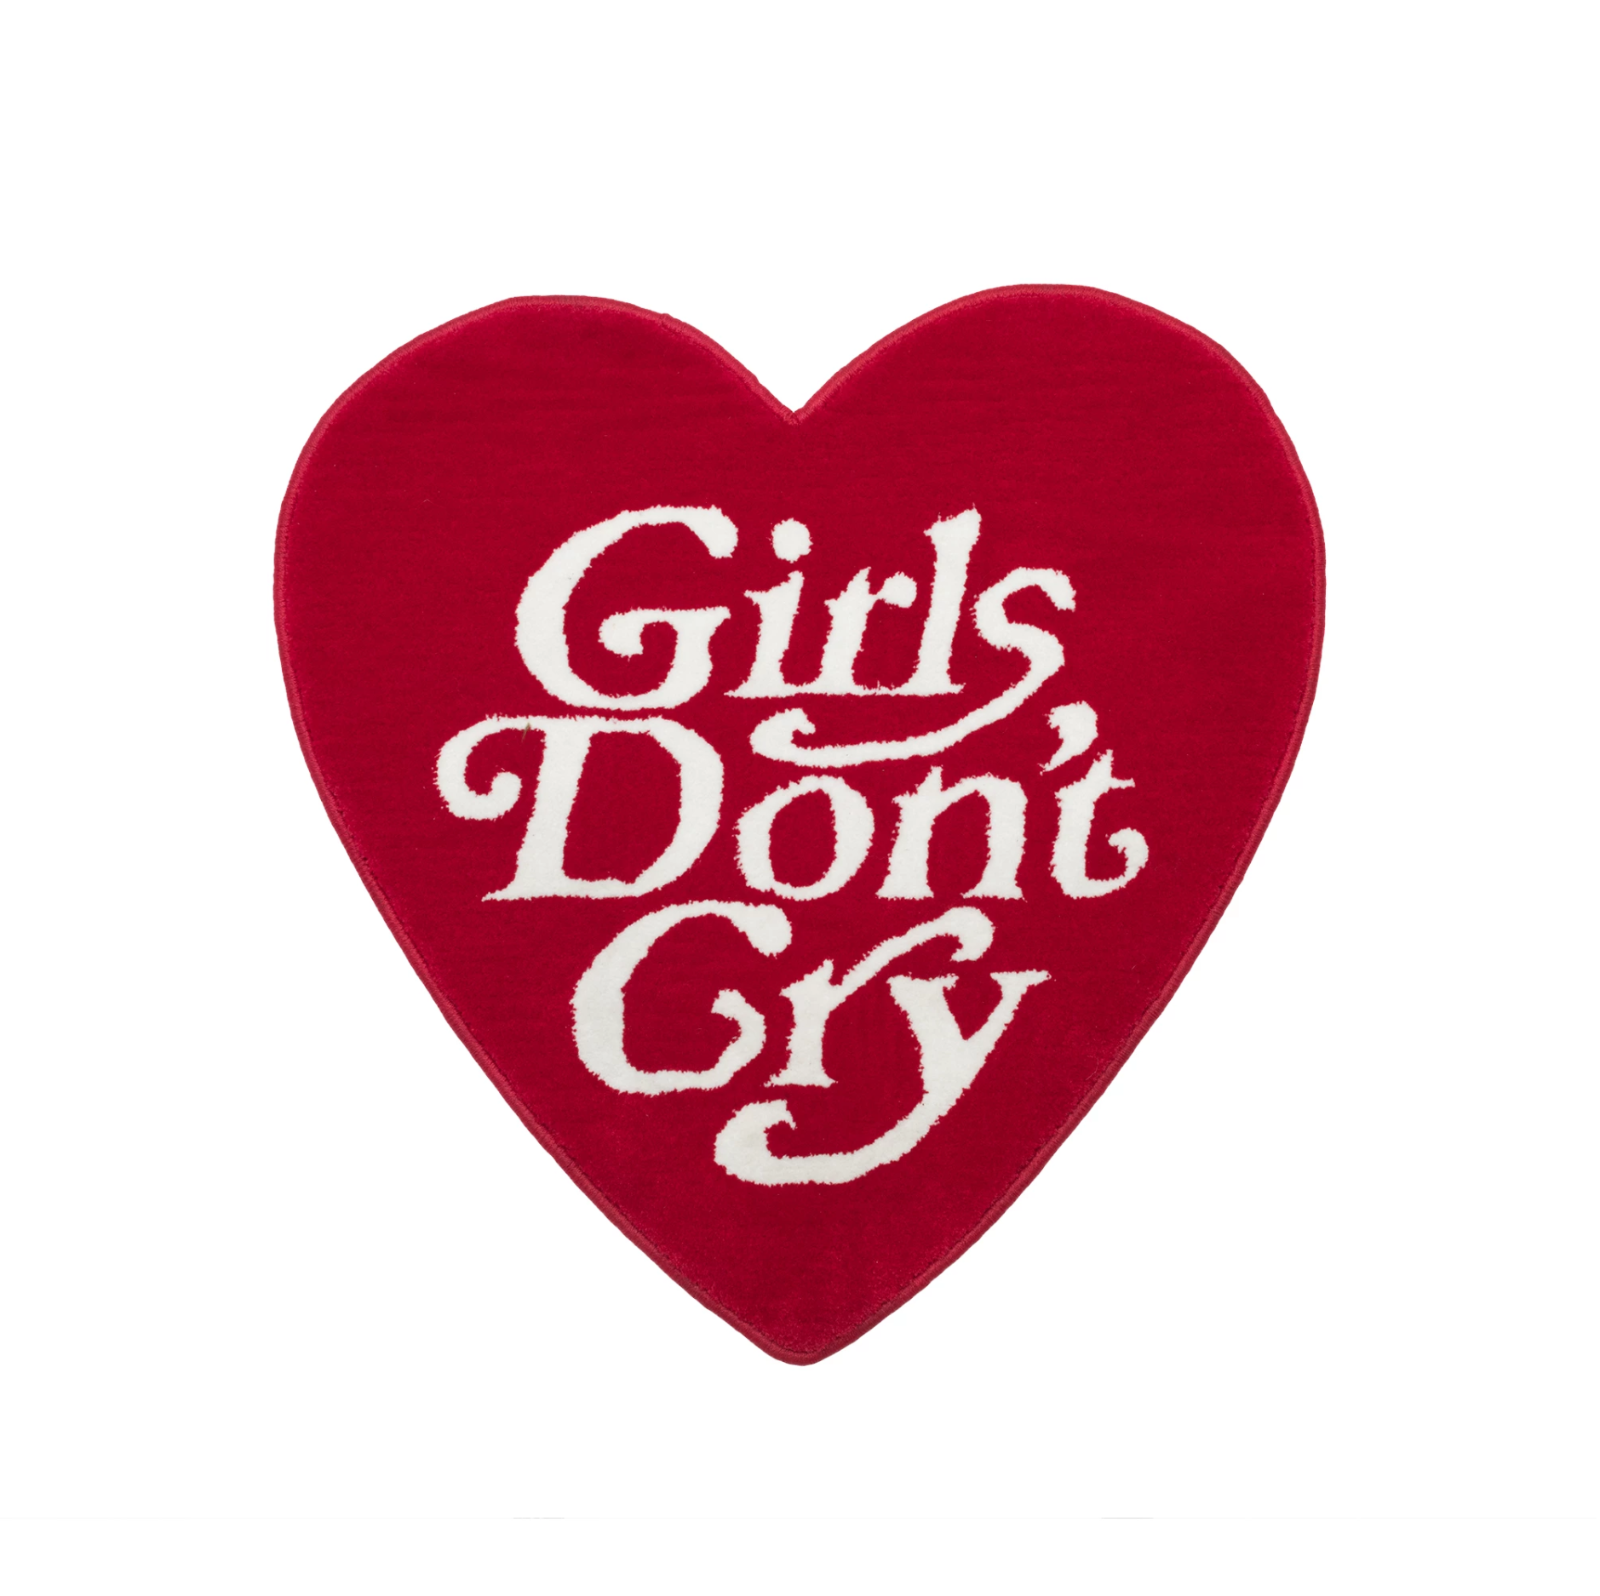 Girls Don't Cry Heart Shape Rug verdy wasted youth | eBay